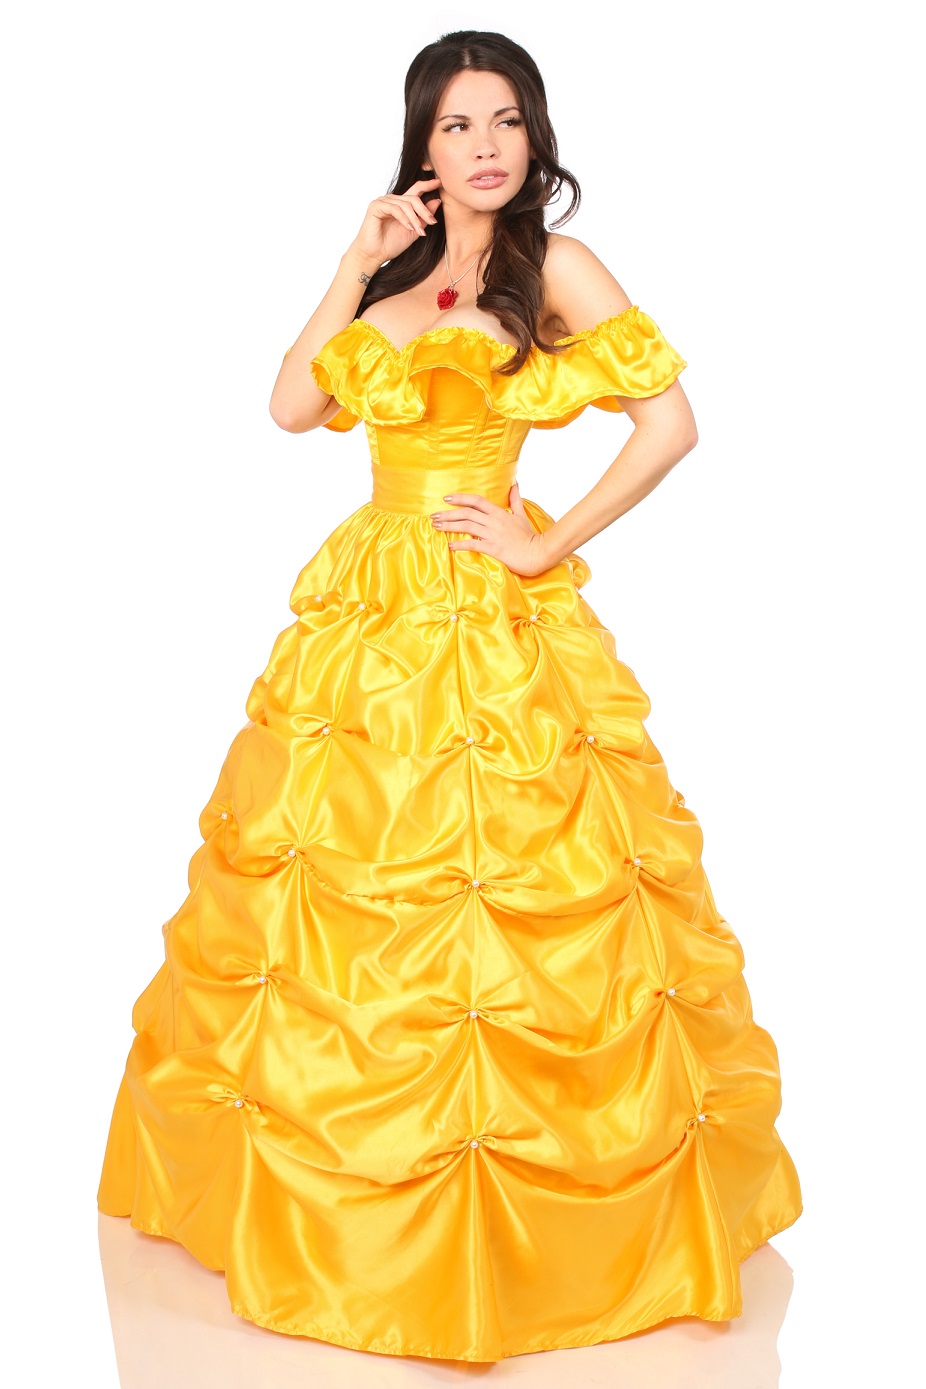 Top Drawer Belle 3 PC Fairytale Beauty Corset Costume